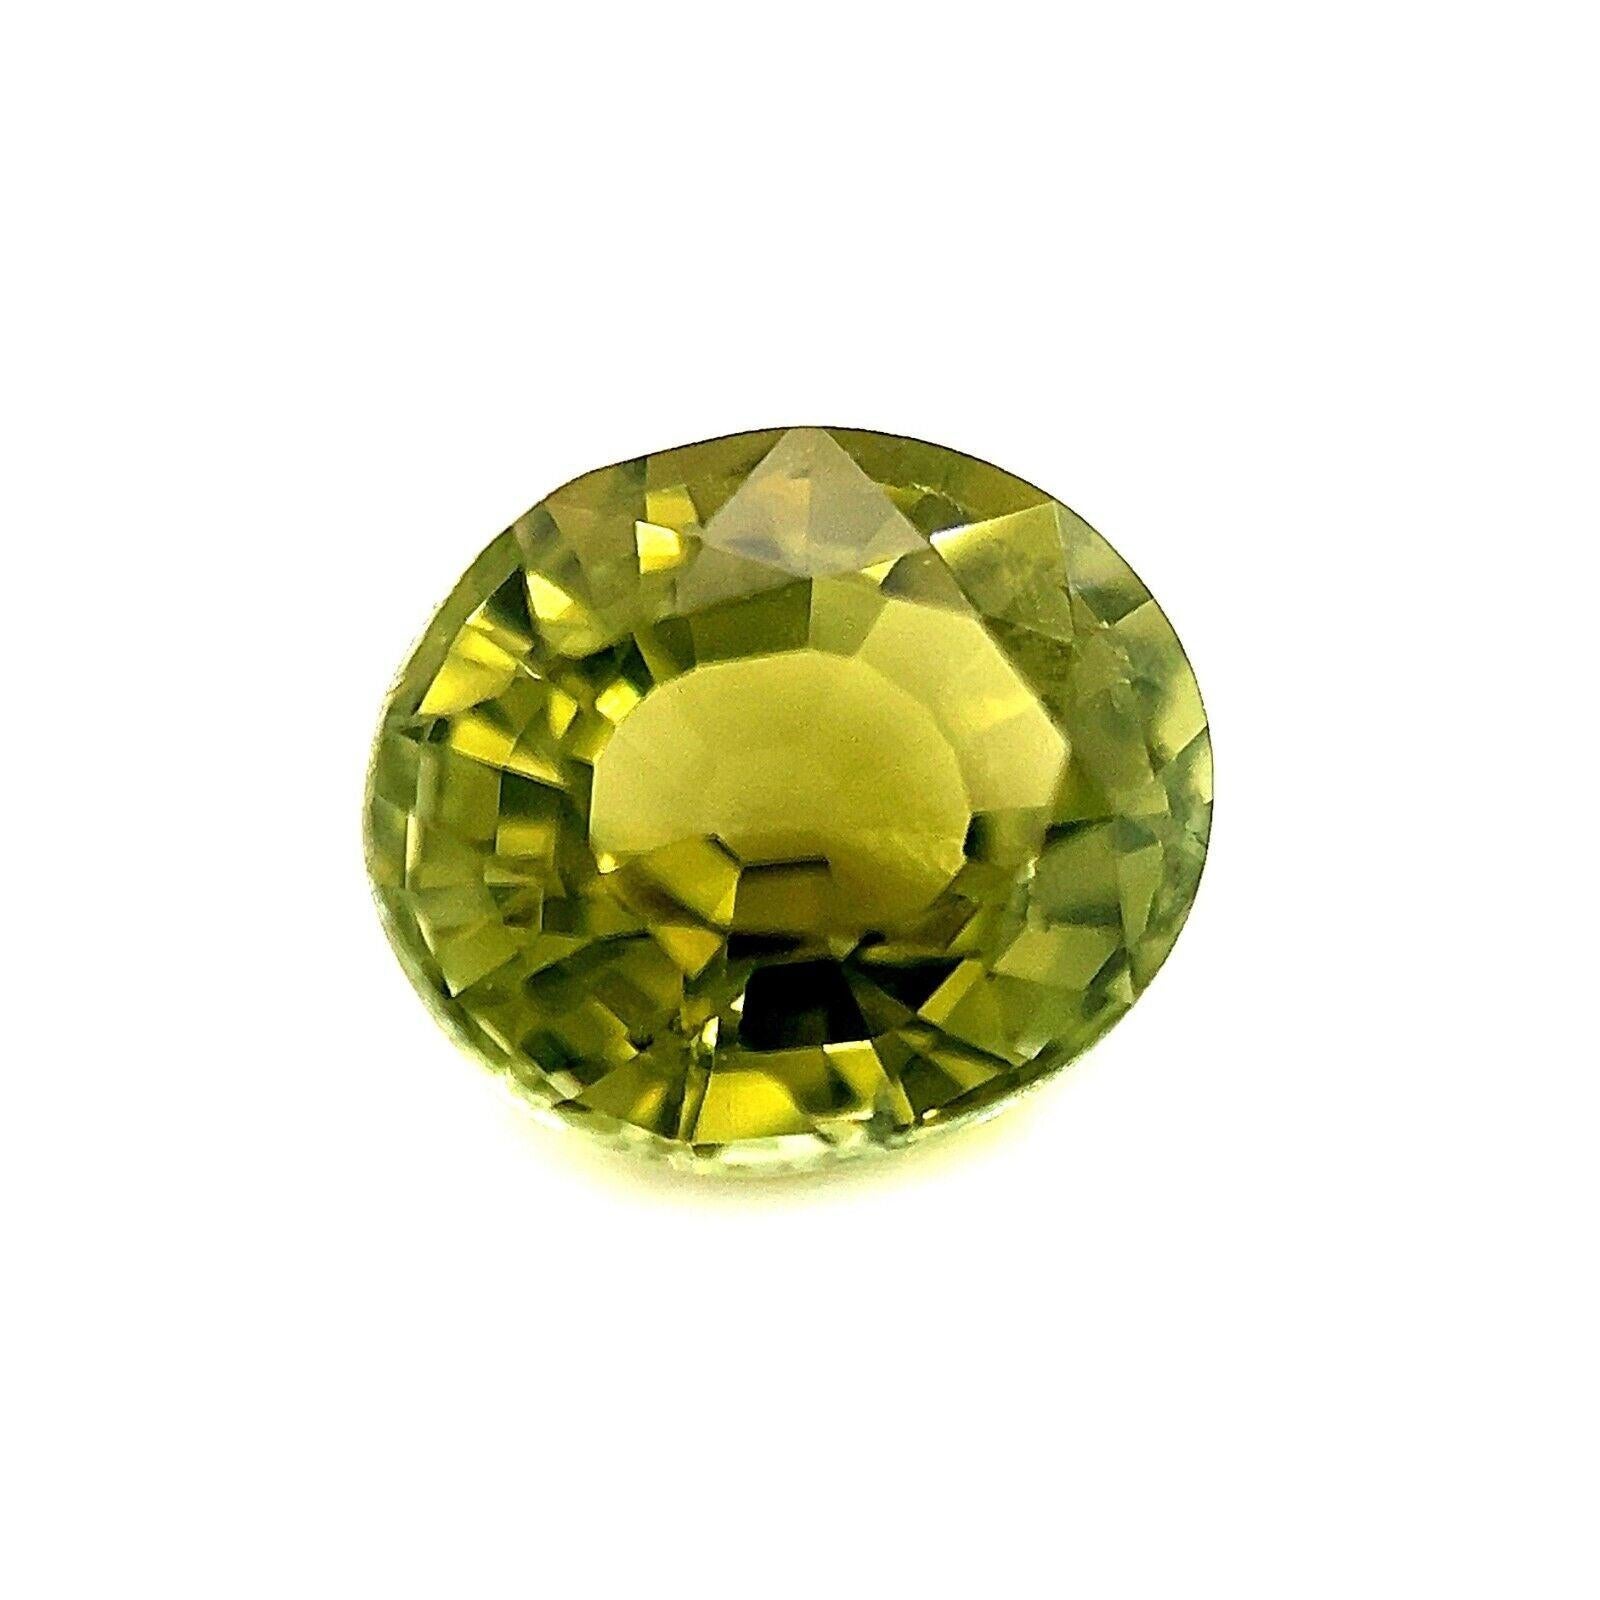 1.80ct Fine Olive Green Tourmaline Oval Cut Loose Gemstone 8x6.8mm

Natural Olive Green Tourmaline Gemstone.
1.80 Carat stone with a beautiful olive green colour and very good clarity. Also has an excellent oval cut with good proportions and